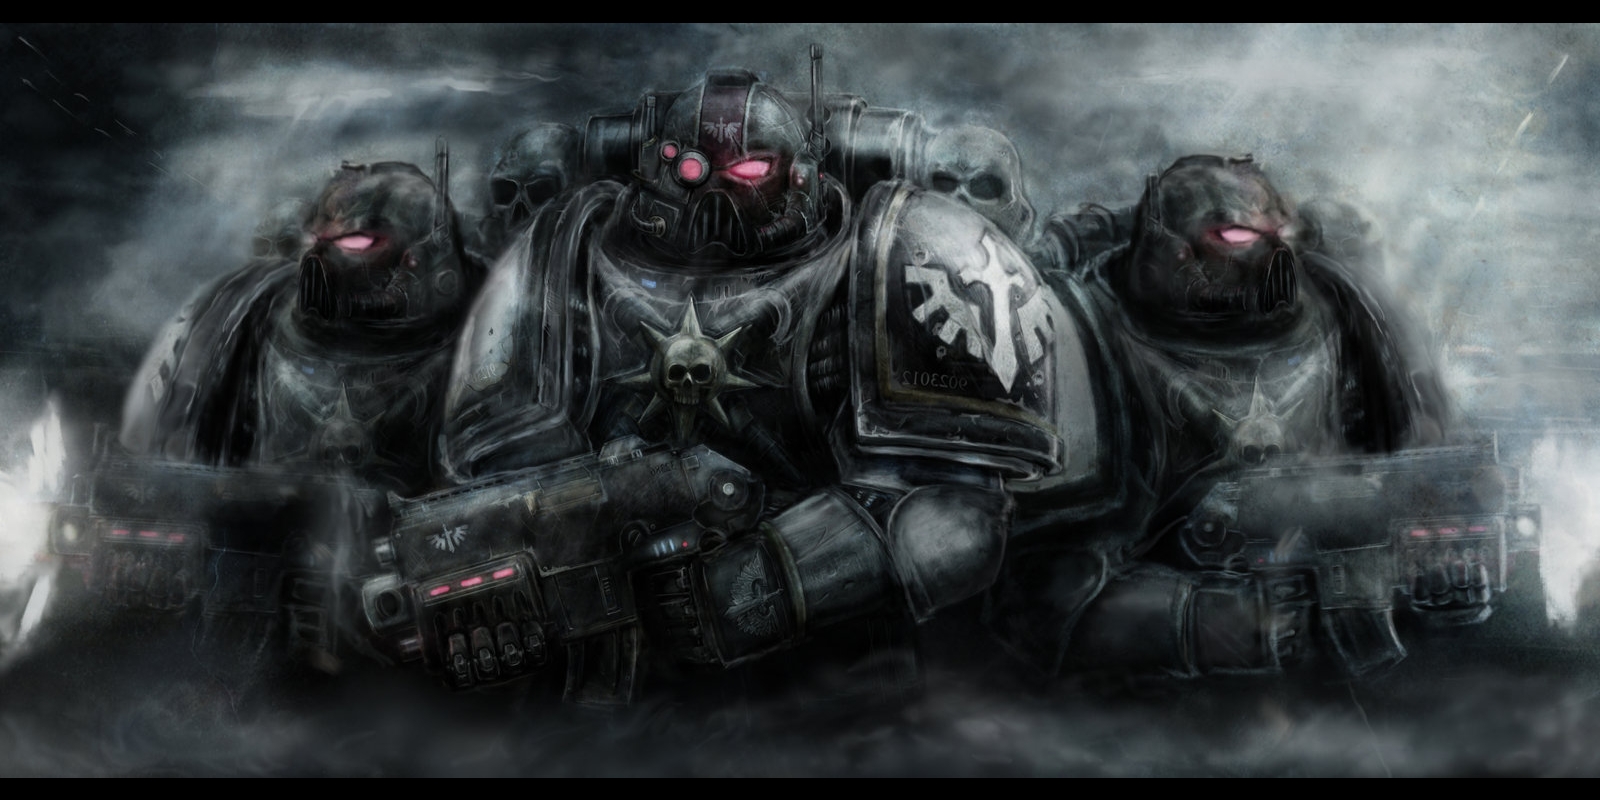 Warhammer 40K HD Wallpapers and Backgrounds  Free Wallpapers  Pinterest   Wallpaper